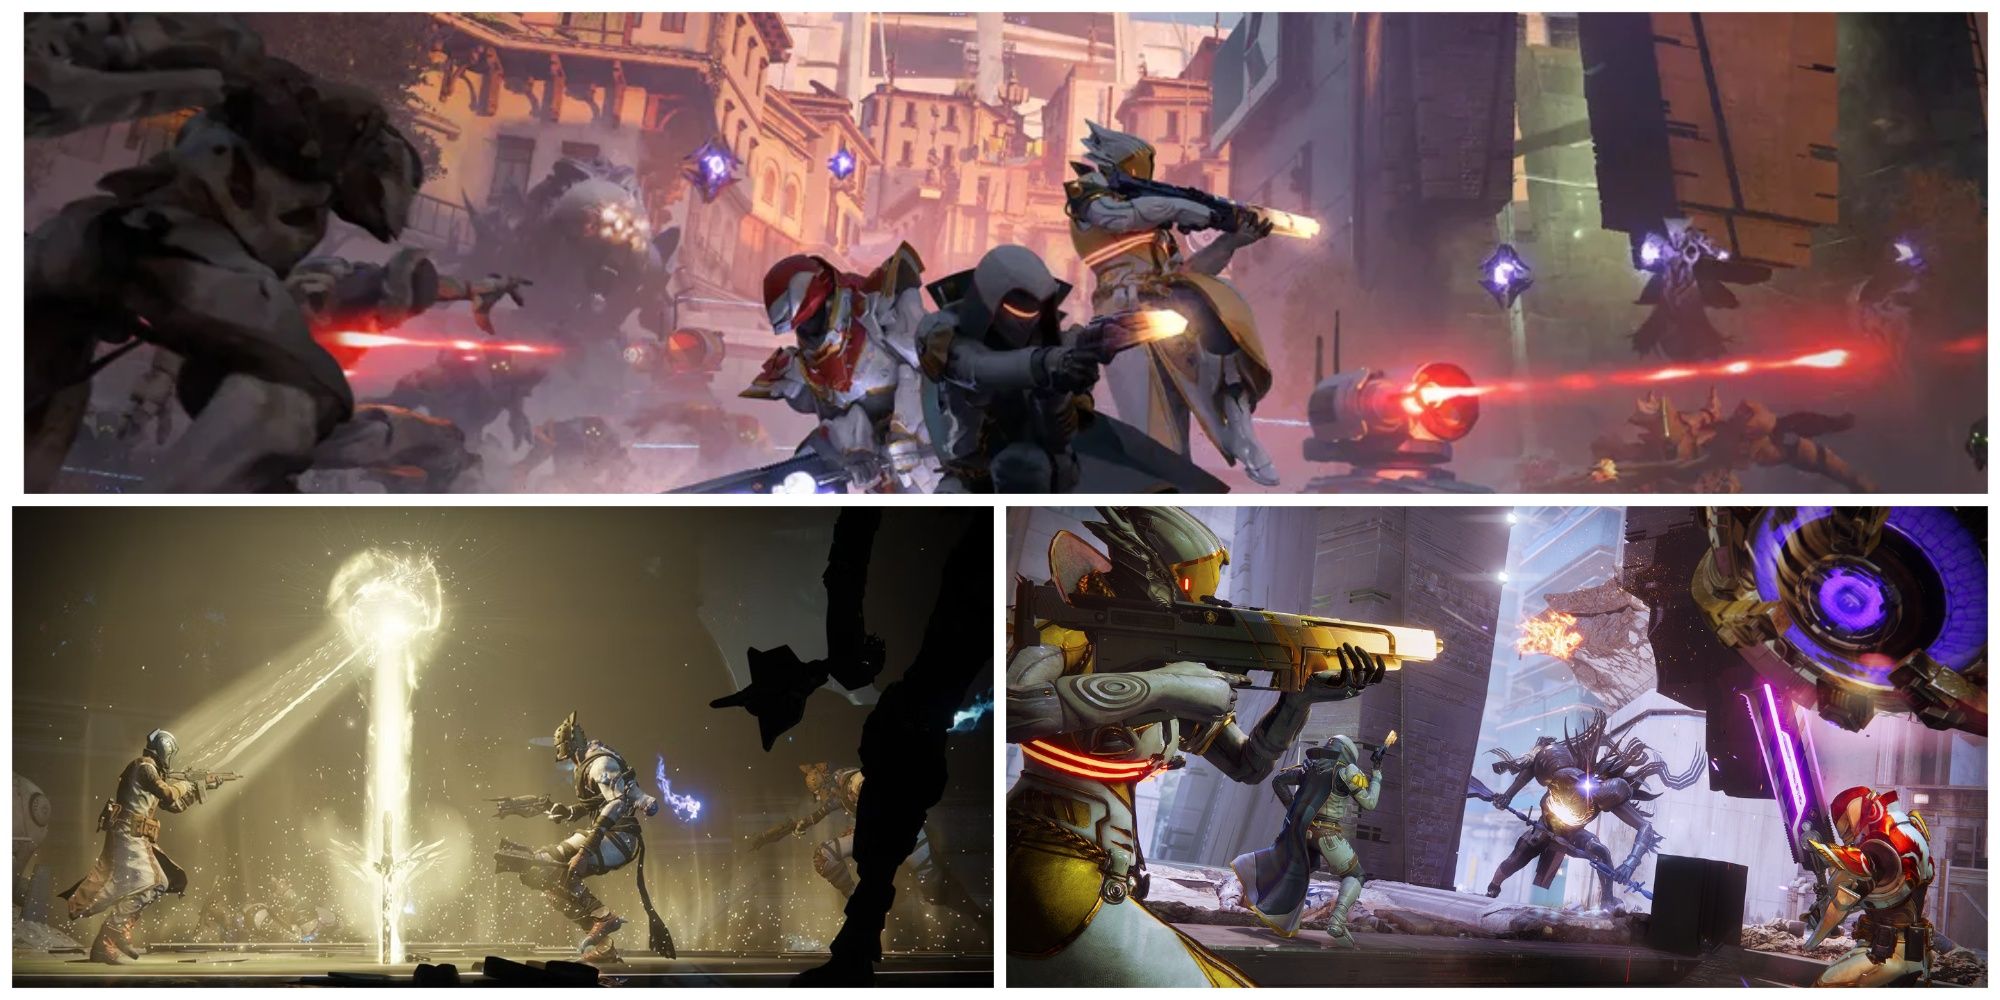 Collage Image of Key Art for Into The Light and Warlocks Fighting